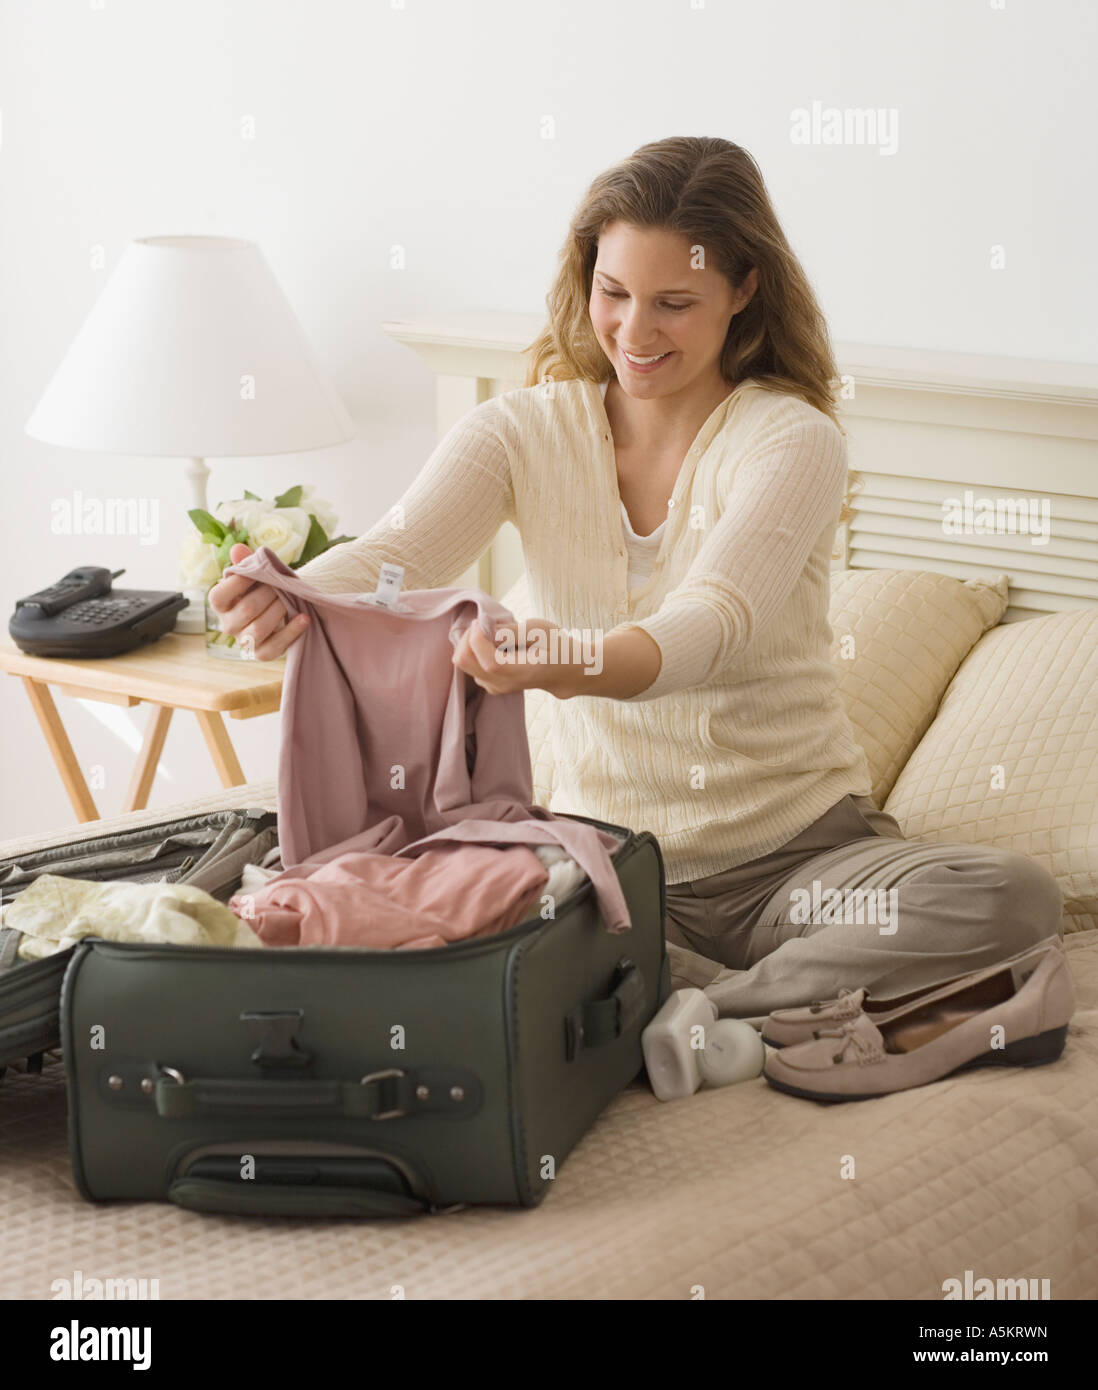 Woman unpacking in hotel room Stock Photo